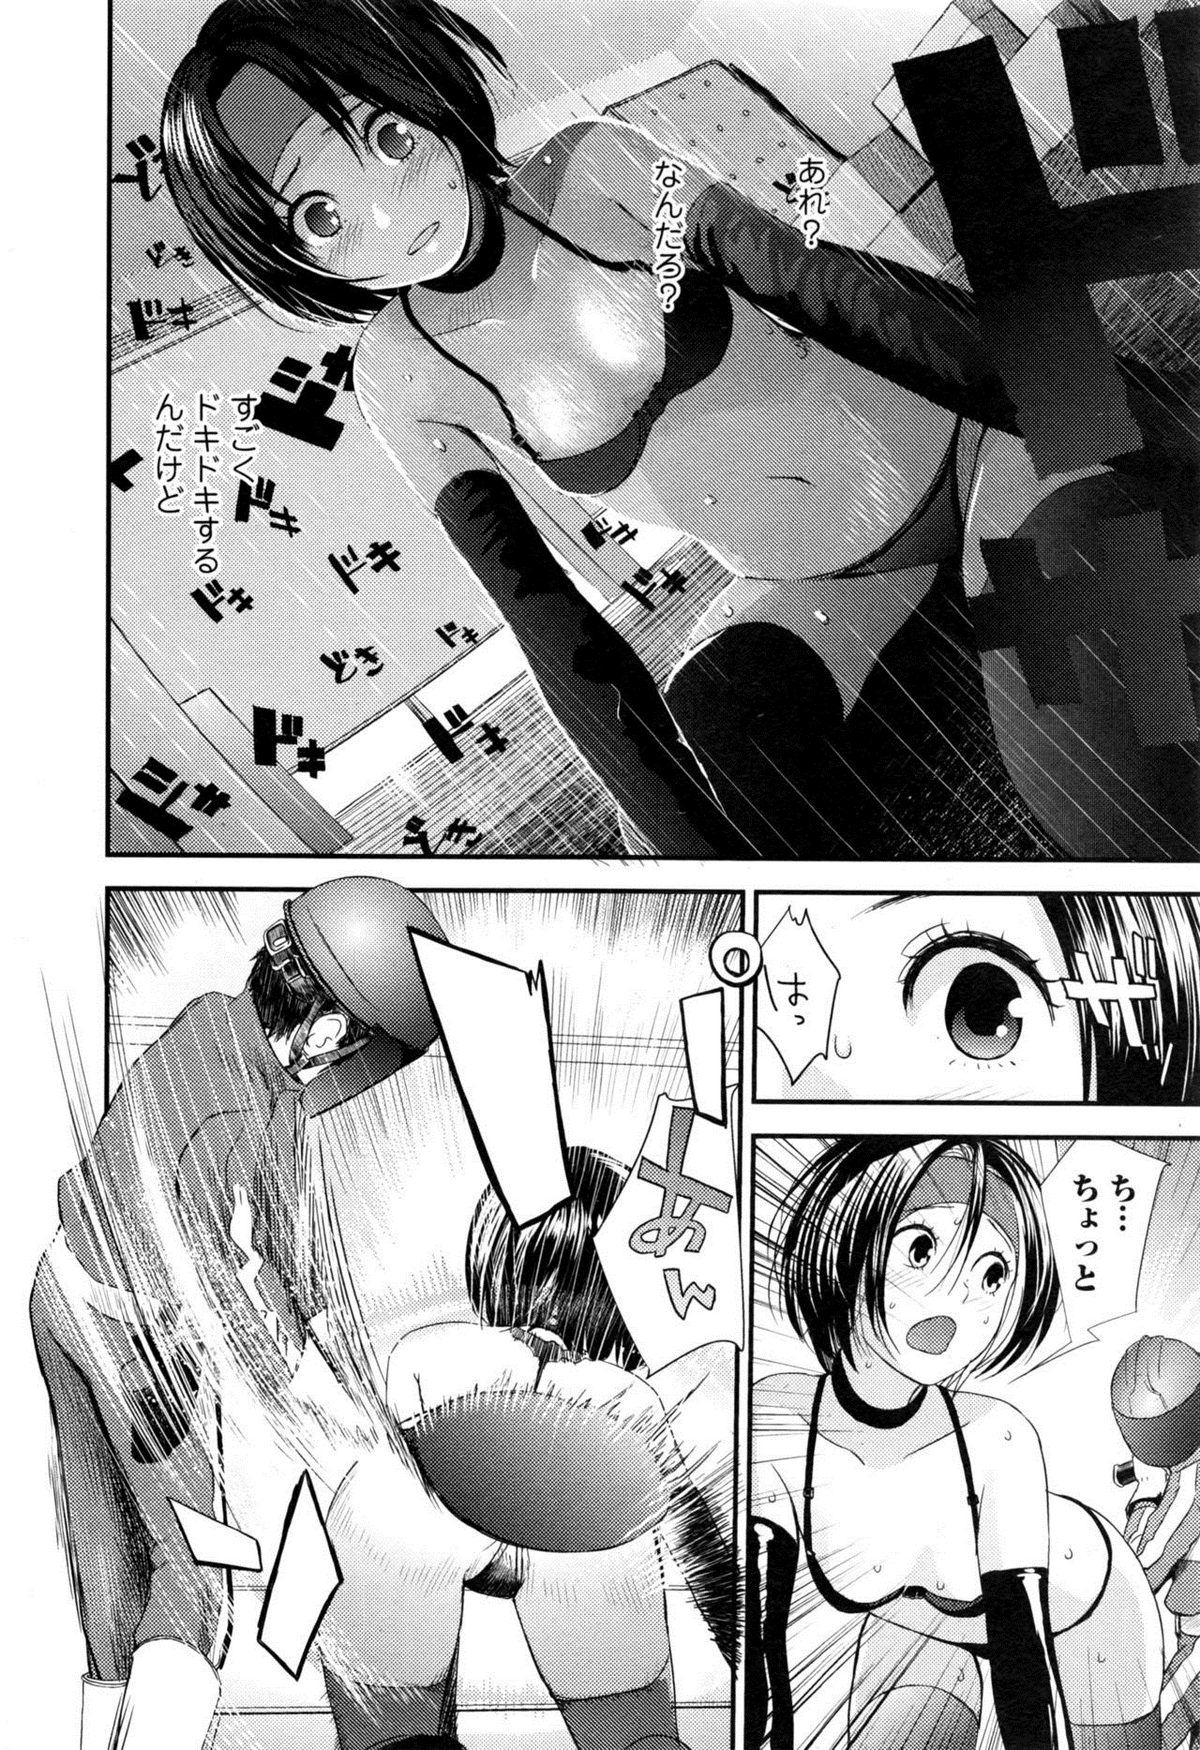 manga page with first of two swats